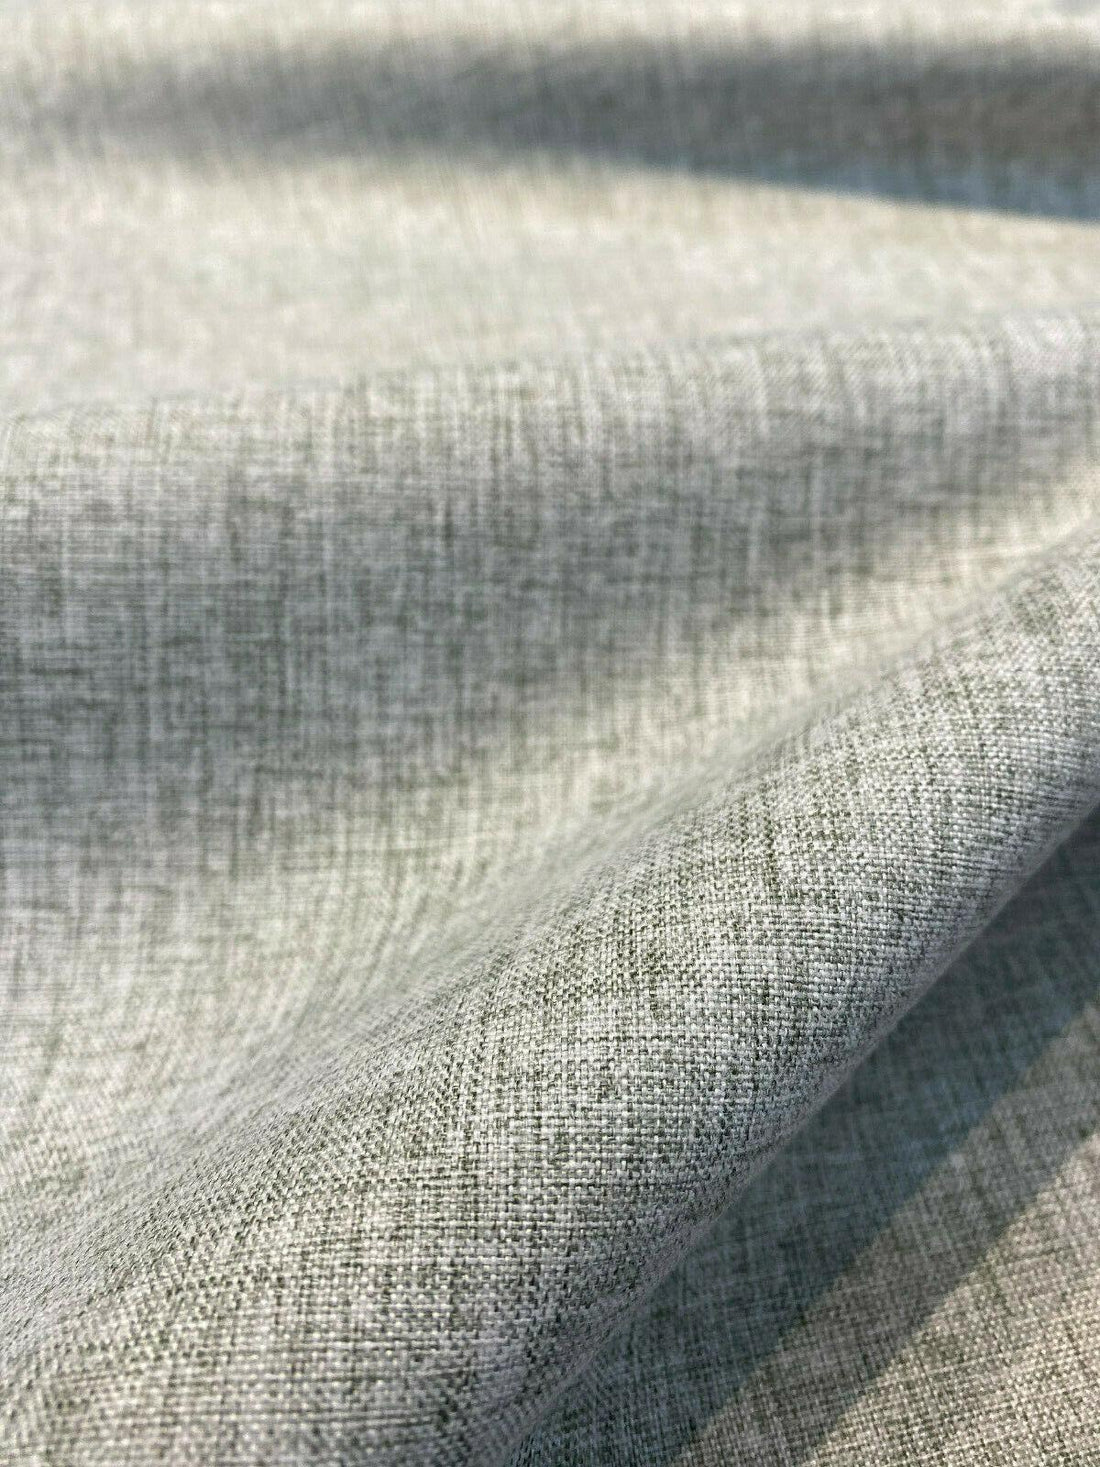 Waverly Northern Lights Pebble Gray White Fabric By The Yard – Affordable  Home Fabrics